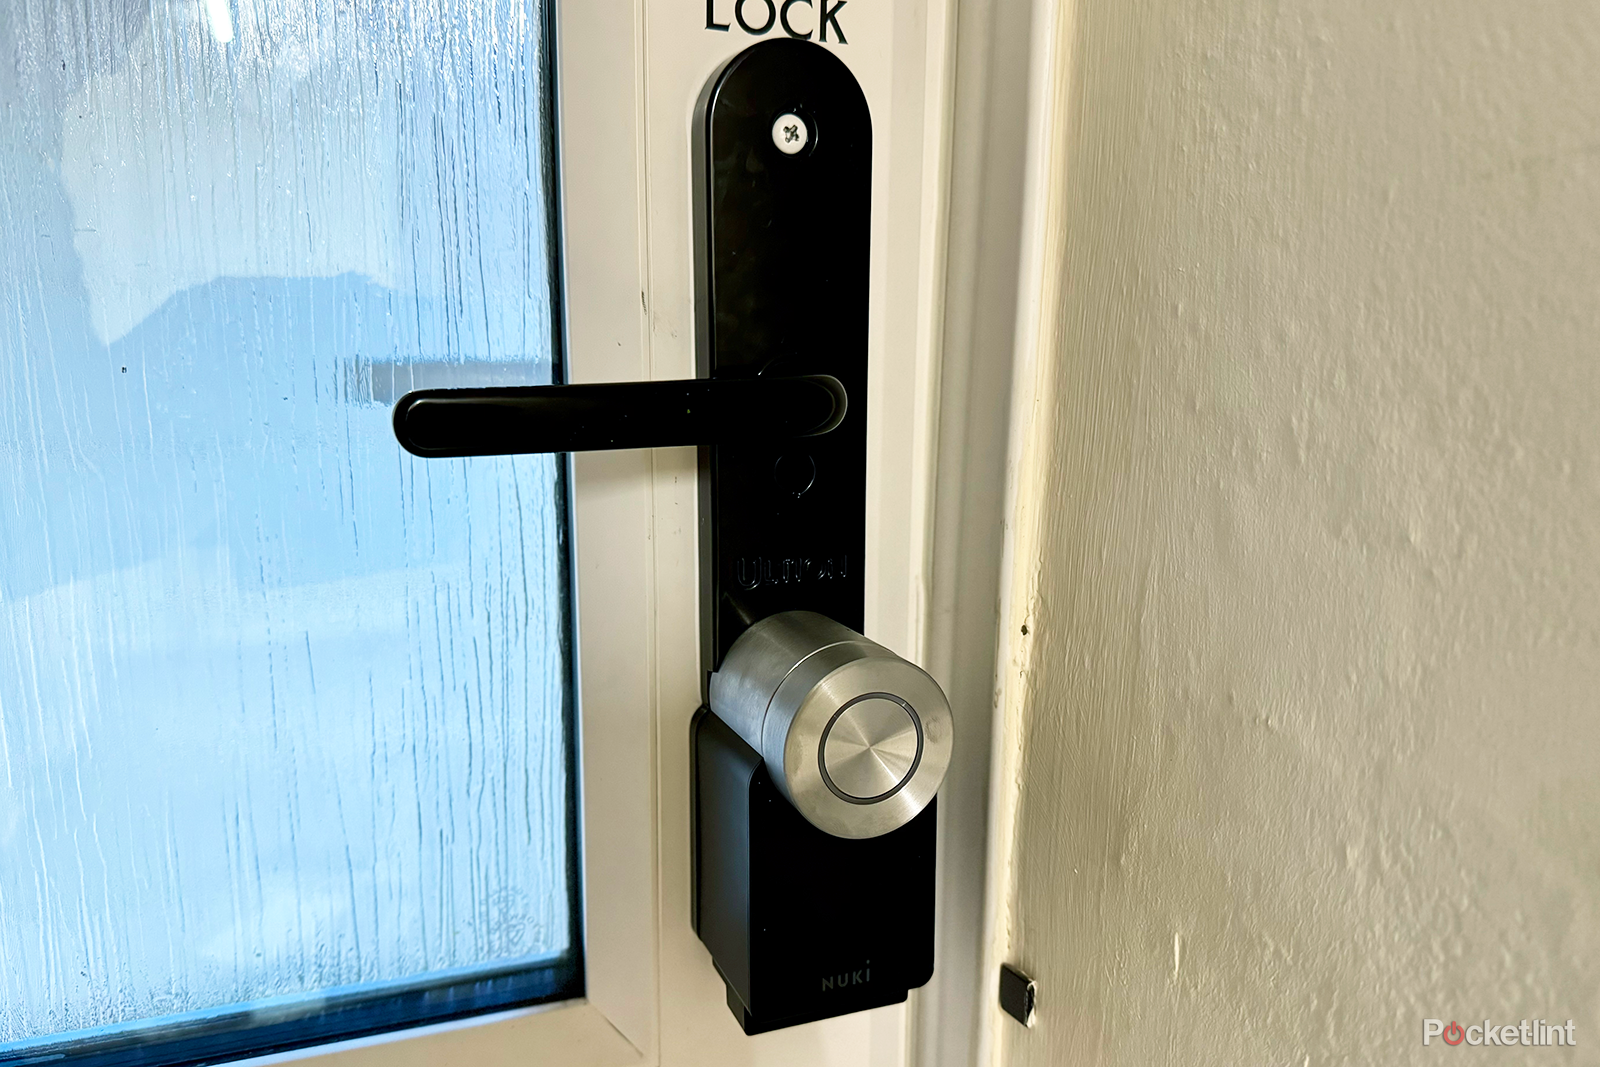 I love the Nuki smart lock and with this Prime Day deal, you will